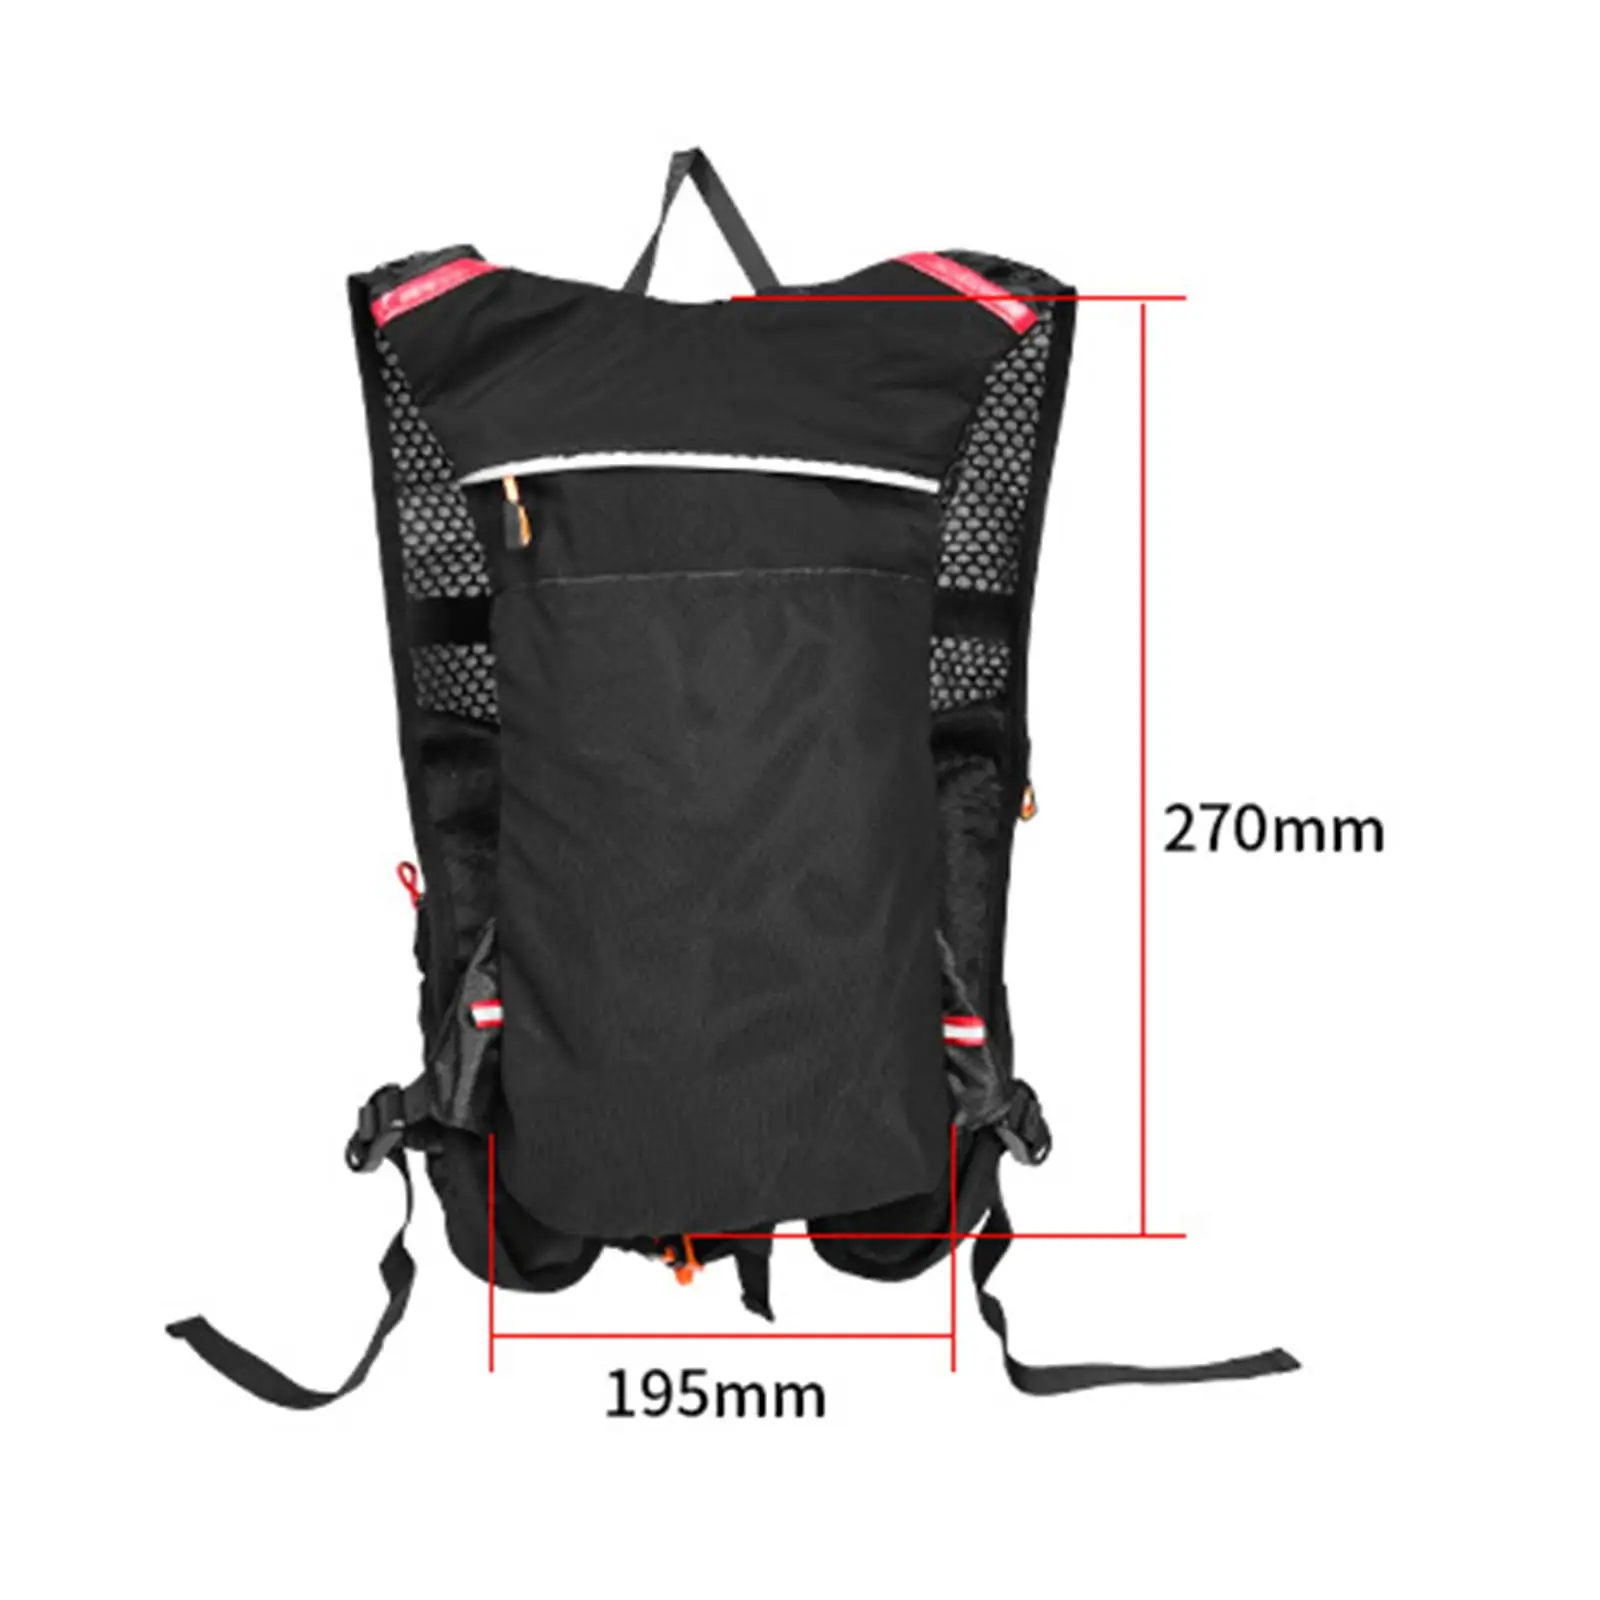 Hydration Backpack Rucksack Water Bag Compartment Nylon Knapsack Daypack for Climbing Backpacking Traveling Riding Hiking